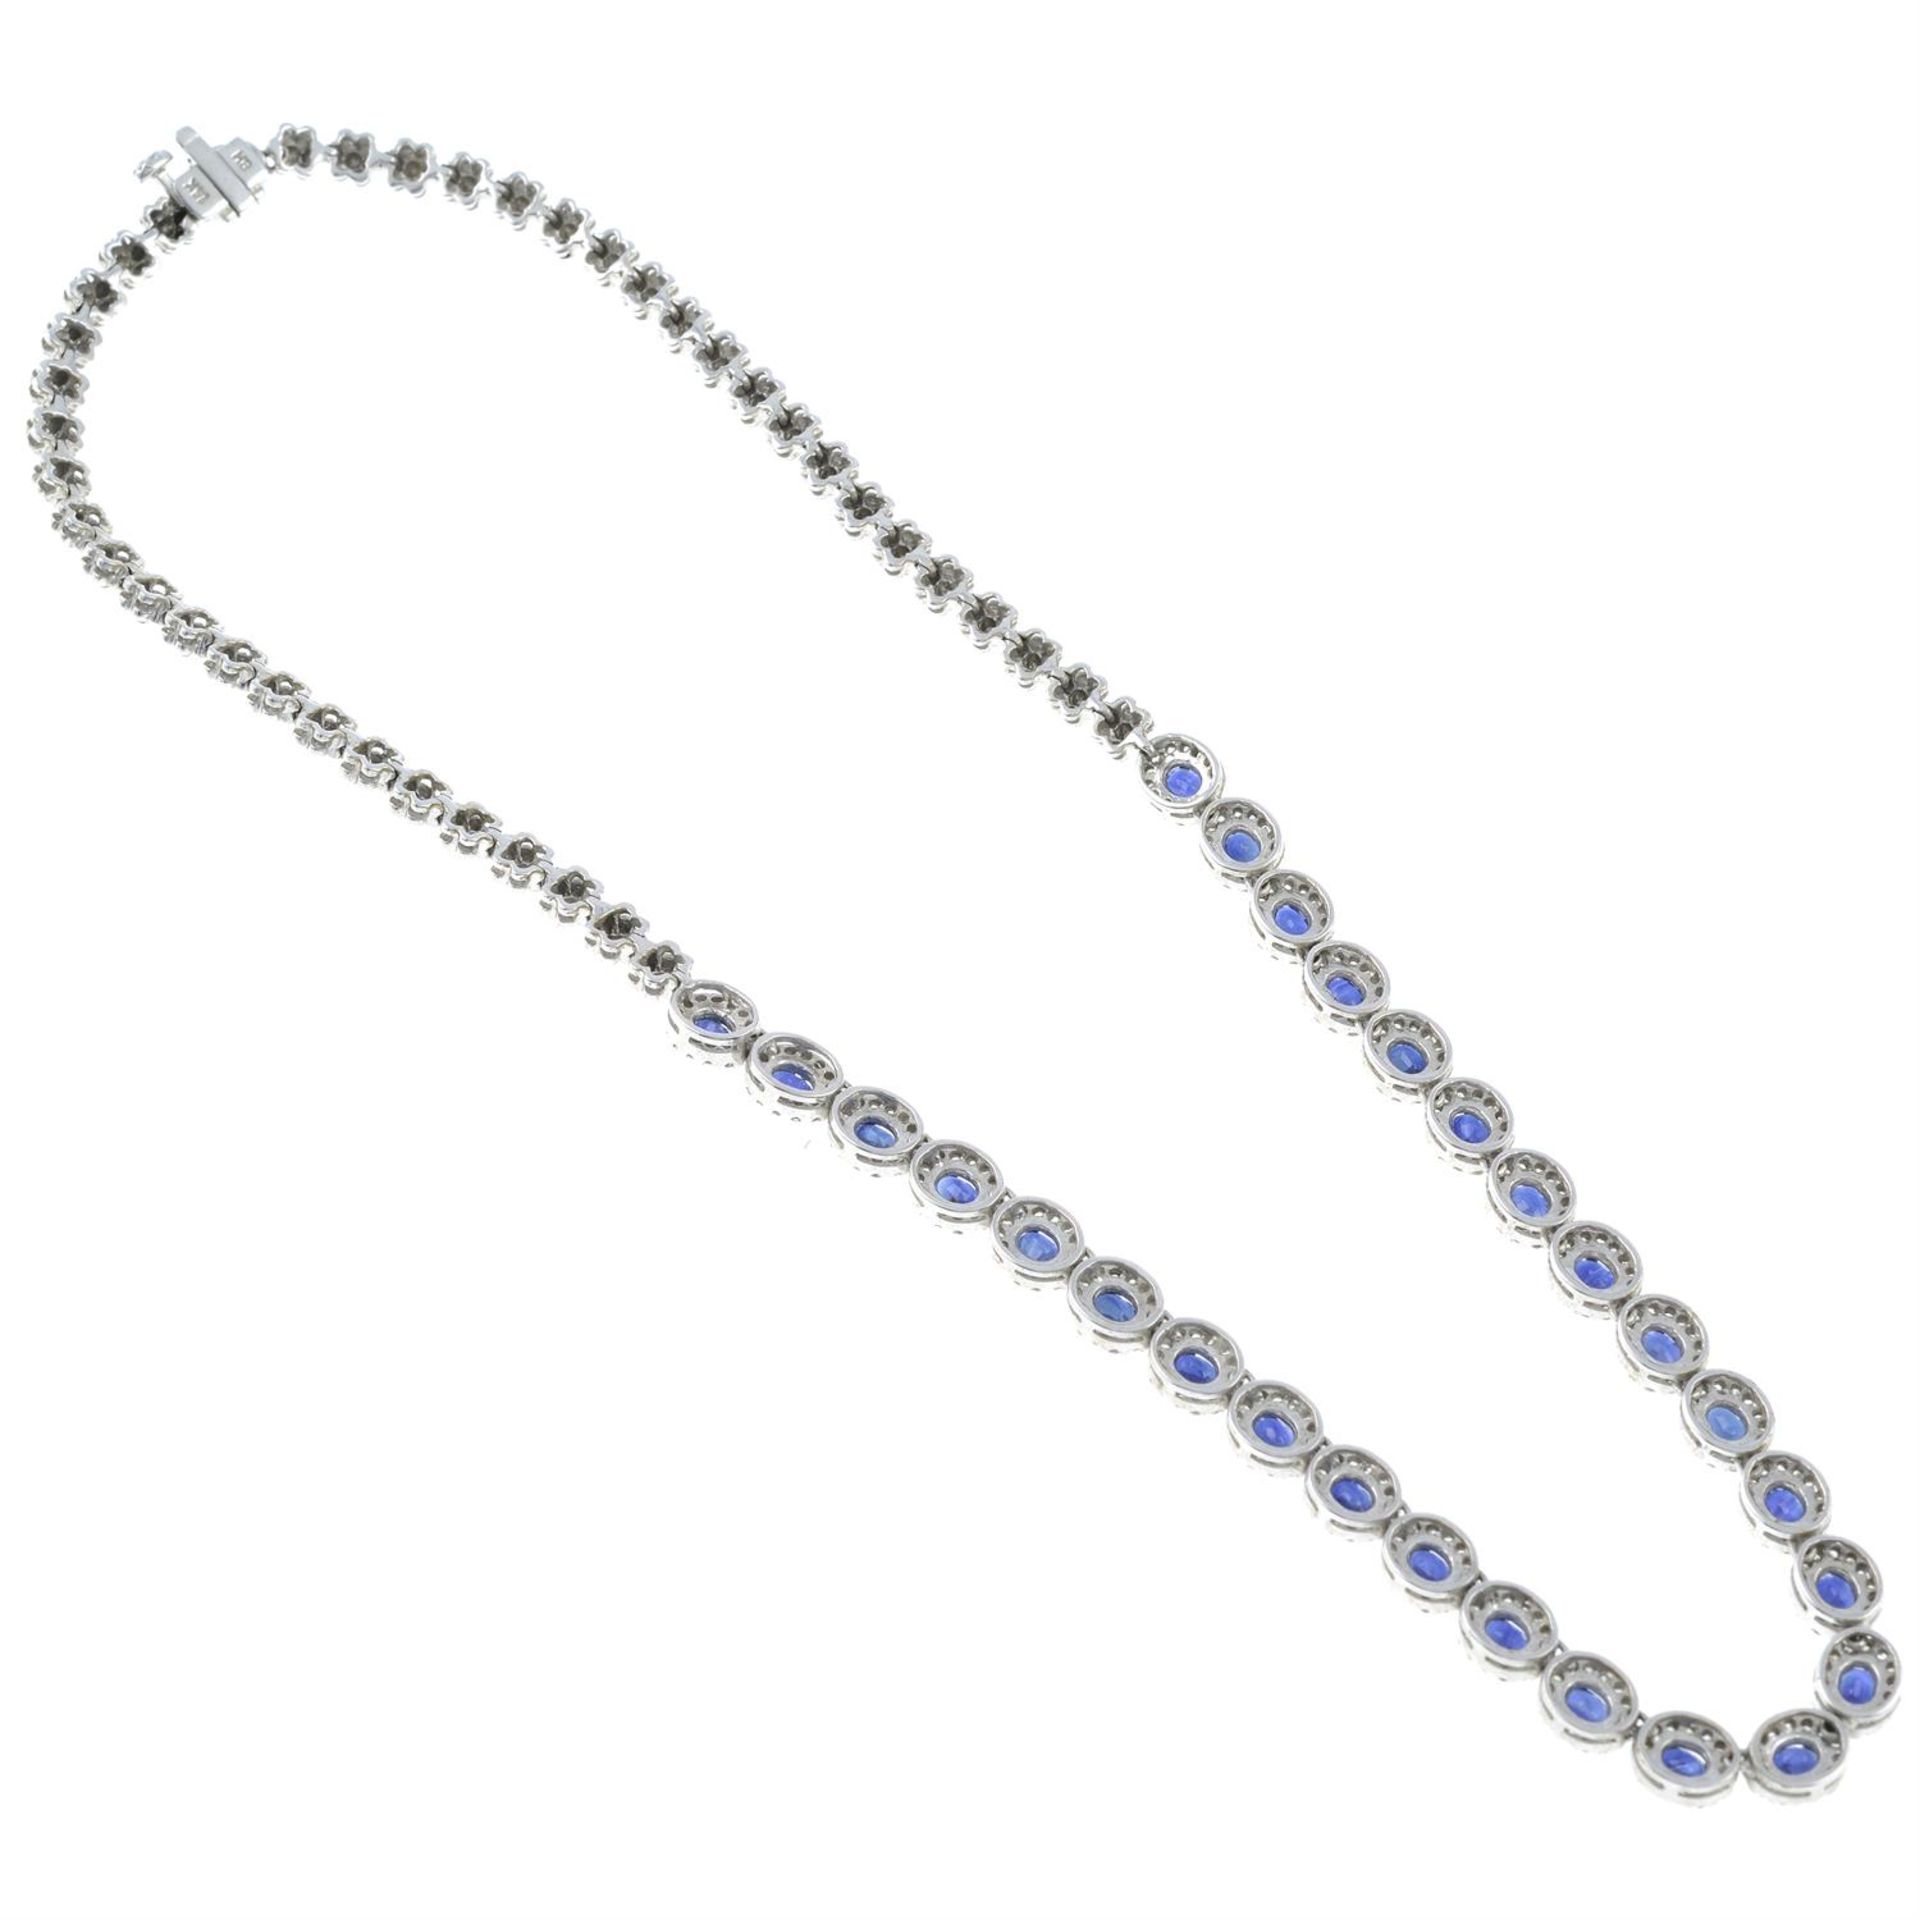 A sapphire and diamond necklace. - Image 2 of 3